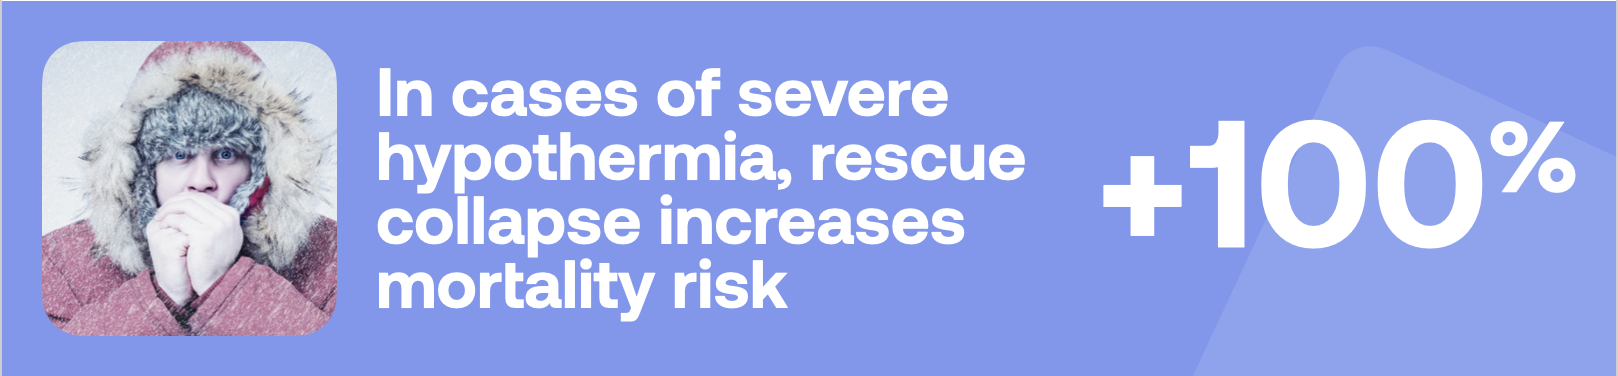 In cases of severe hypothermia, rescue collapse increases mortality risk +100%